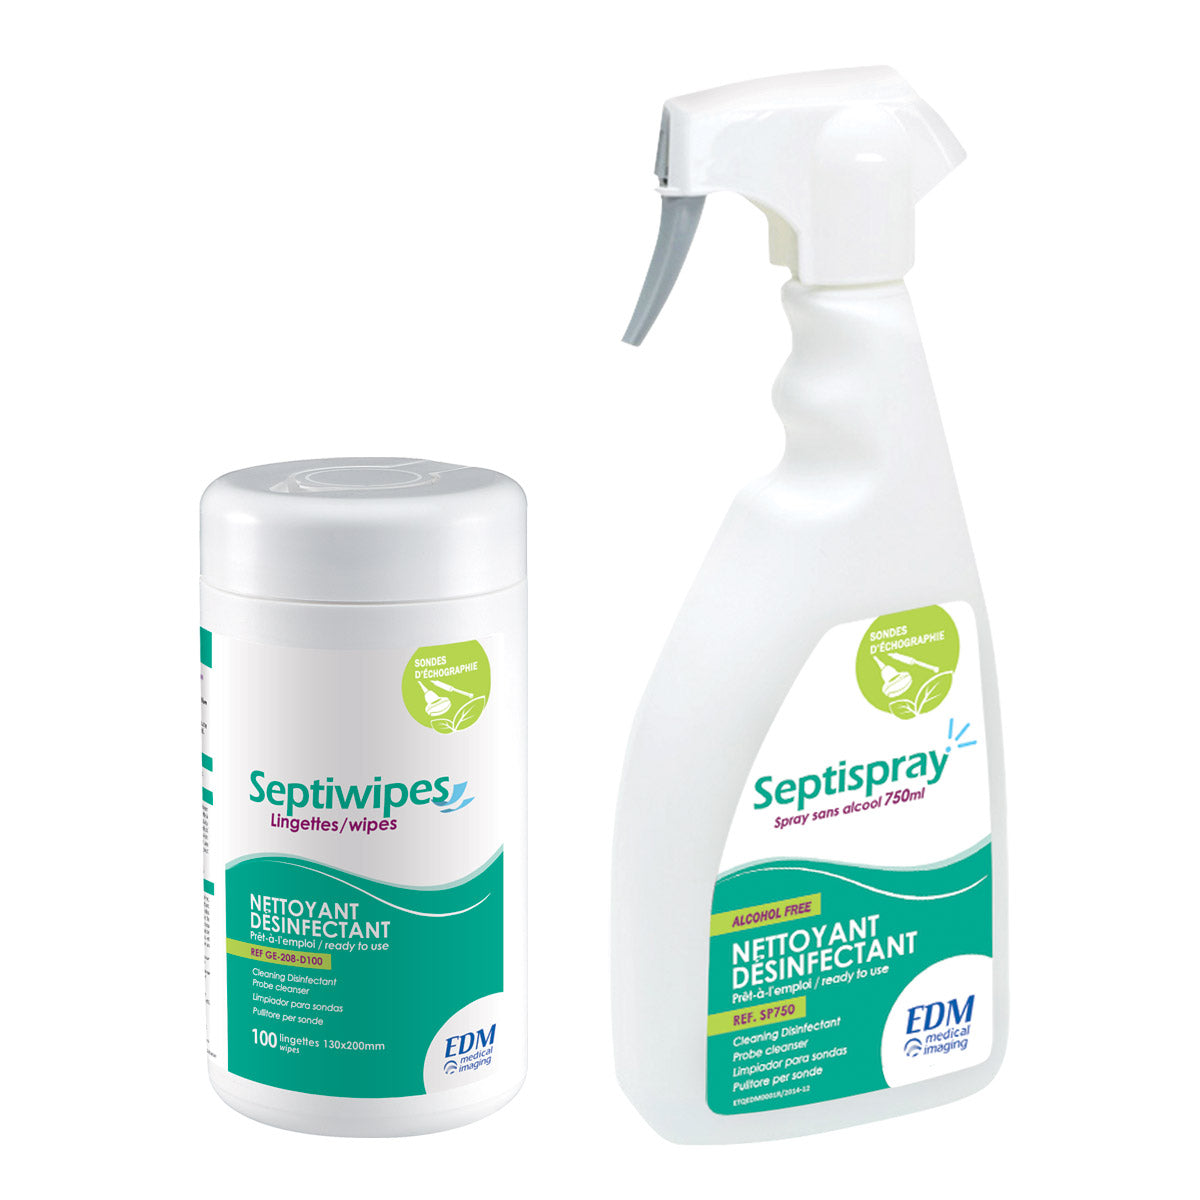 septiwipes-spray-lingettes